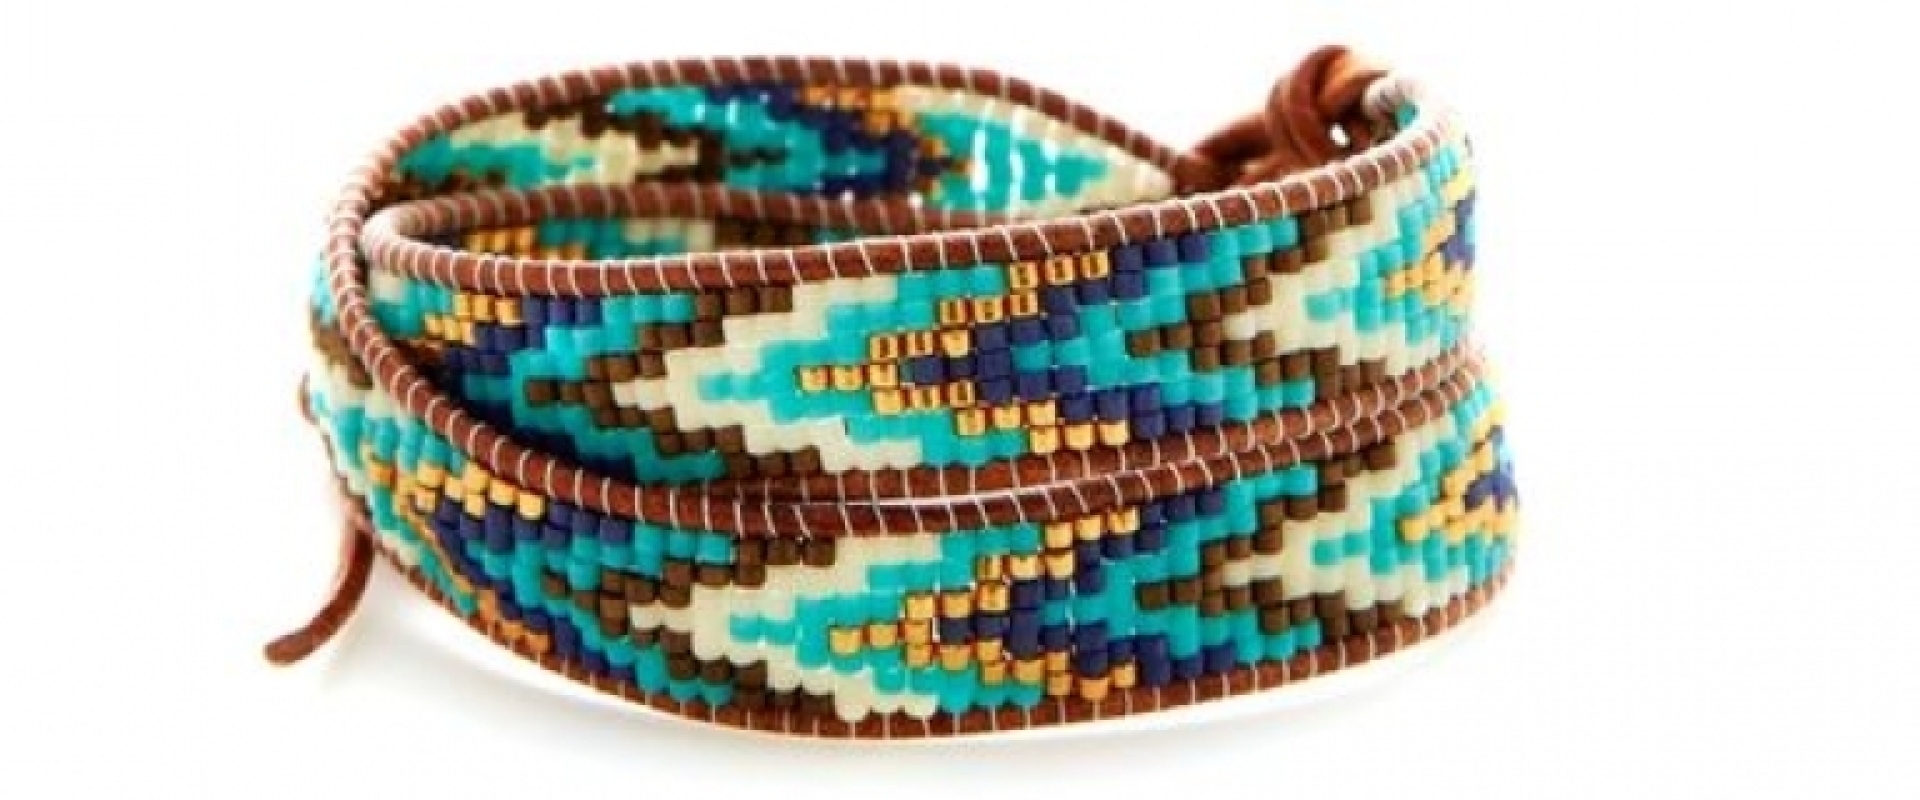 Bead loom pattern for bracelets  Sea and forest  Square stitch tutorial   LadyLunarCat